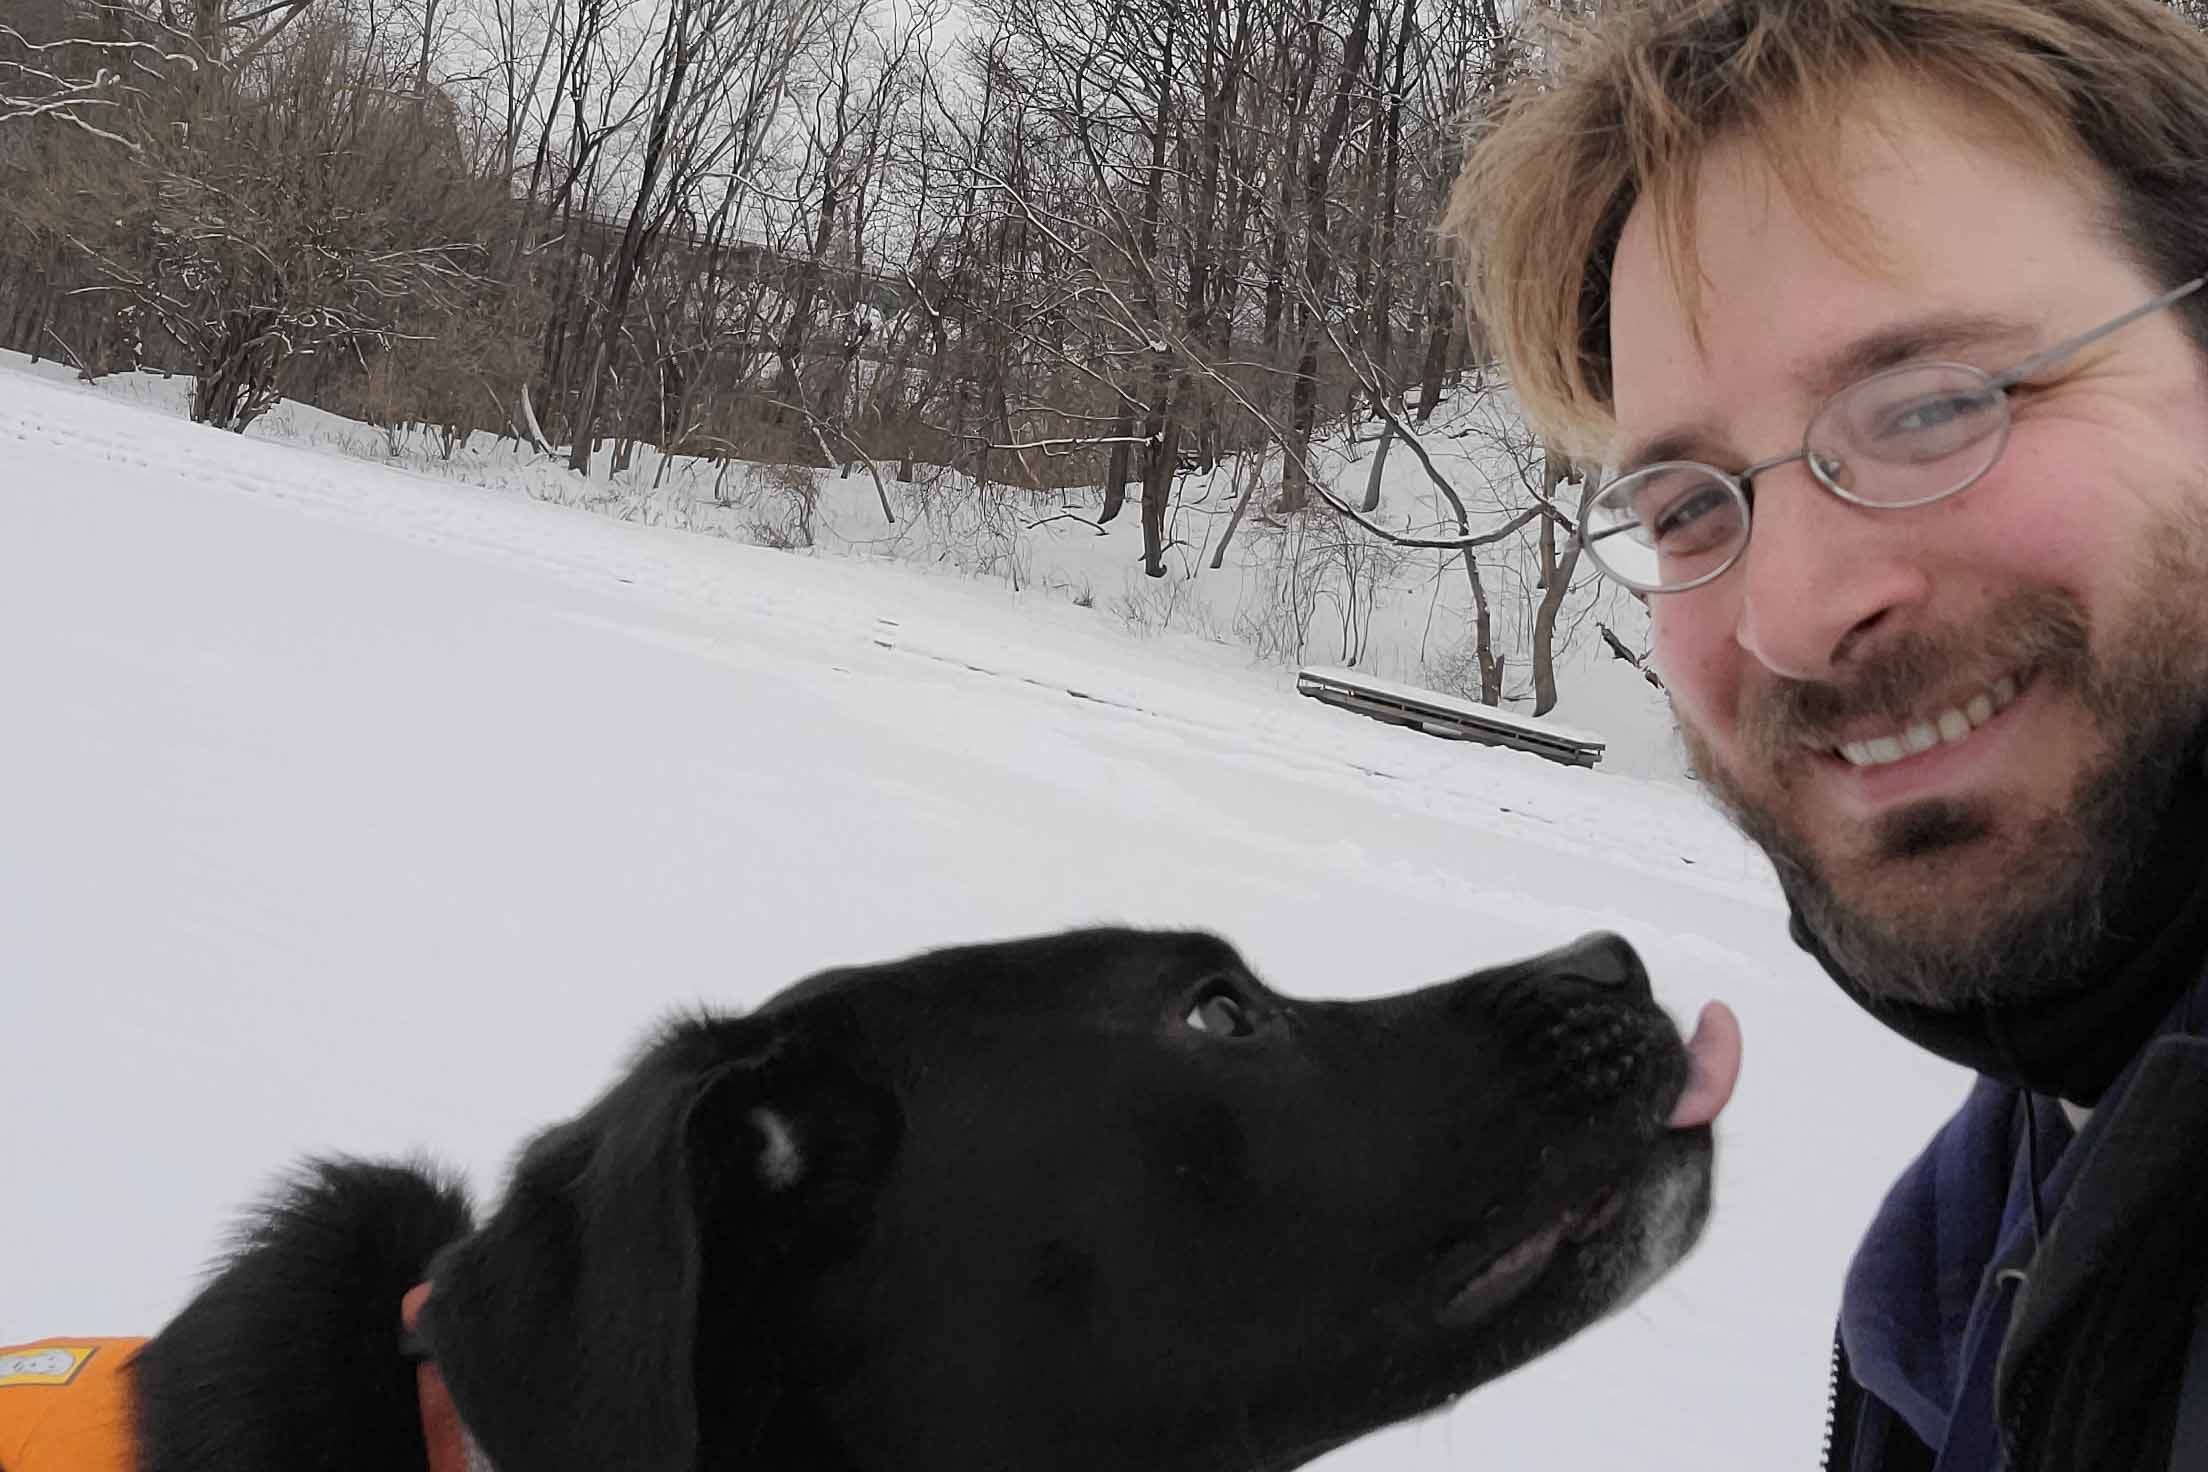 Andrew Ramey and his dog in the snow